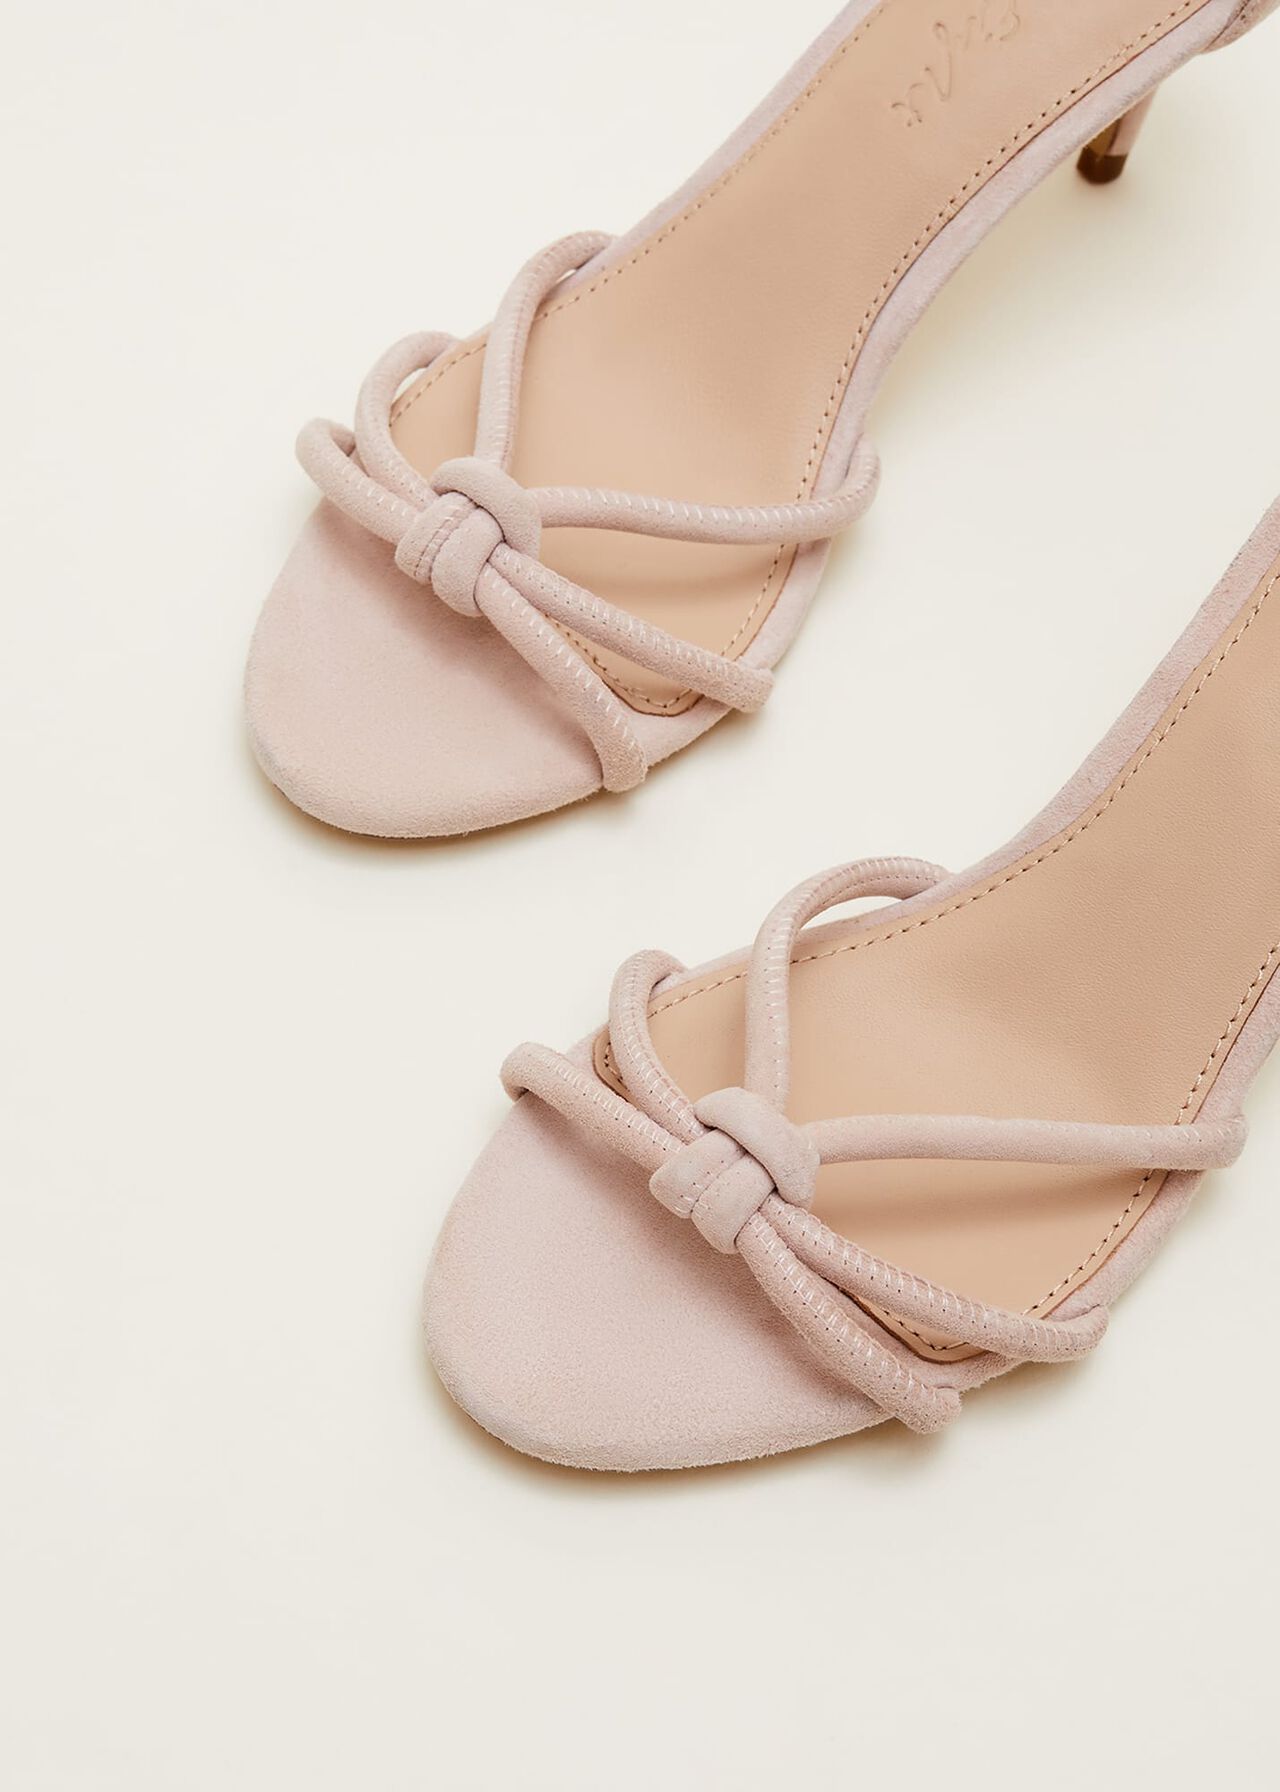 Suede Knotted Barely There Sandal